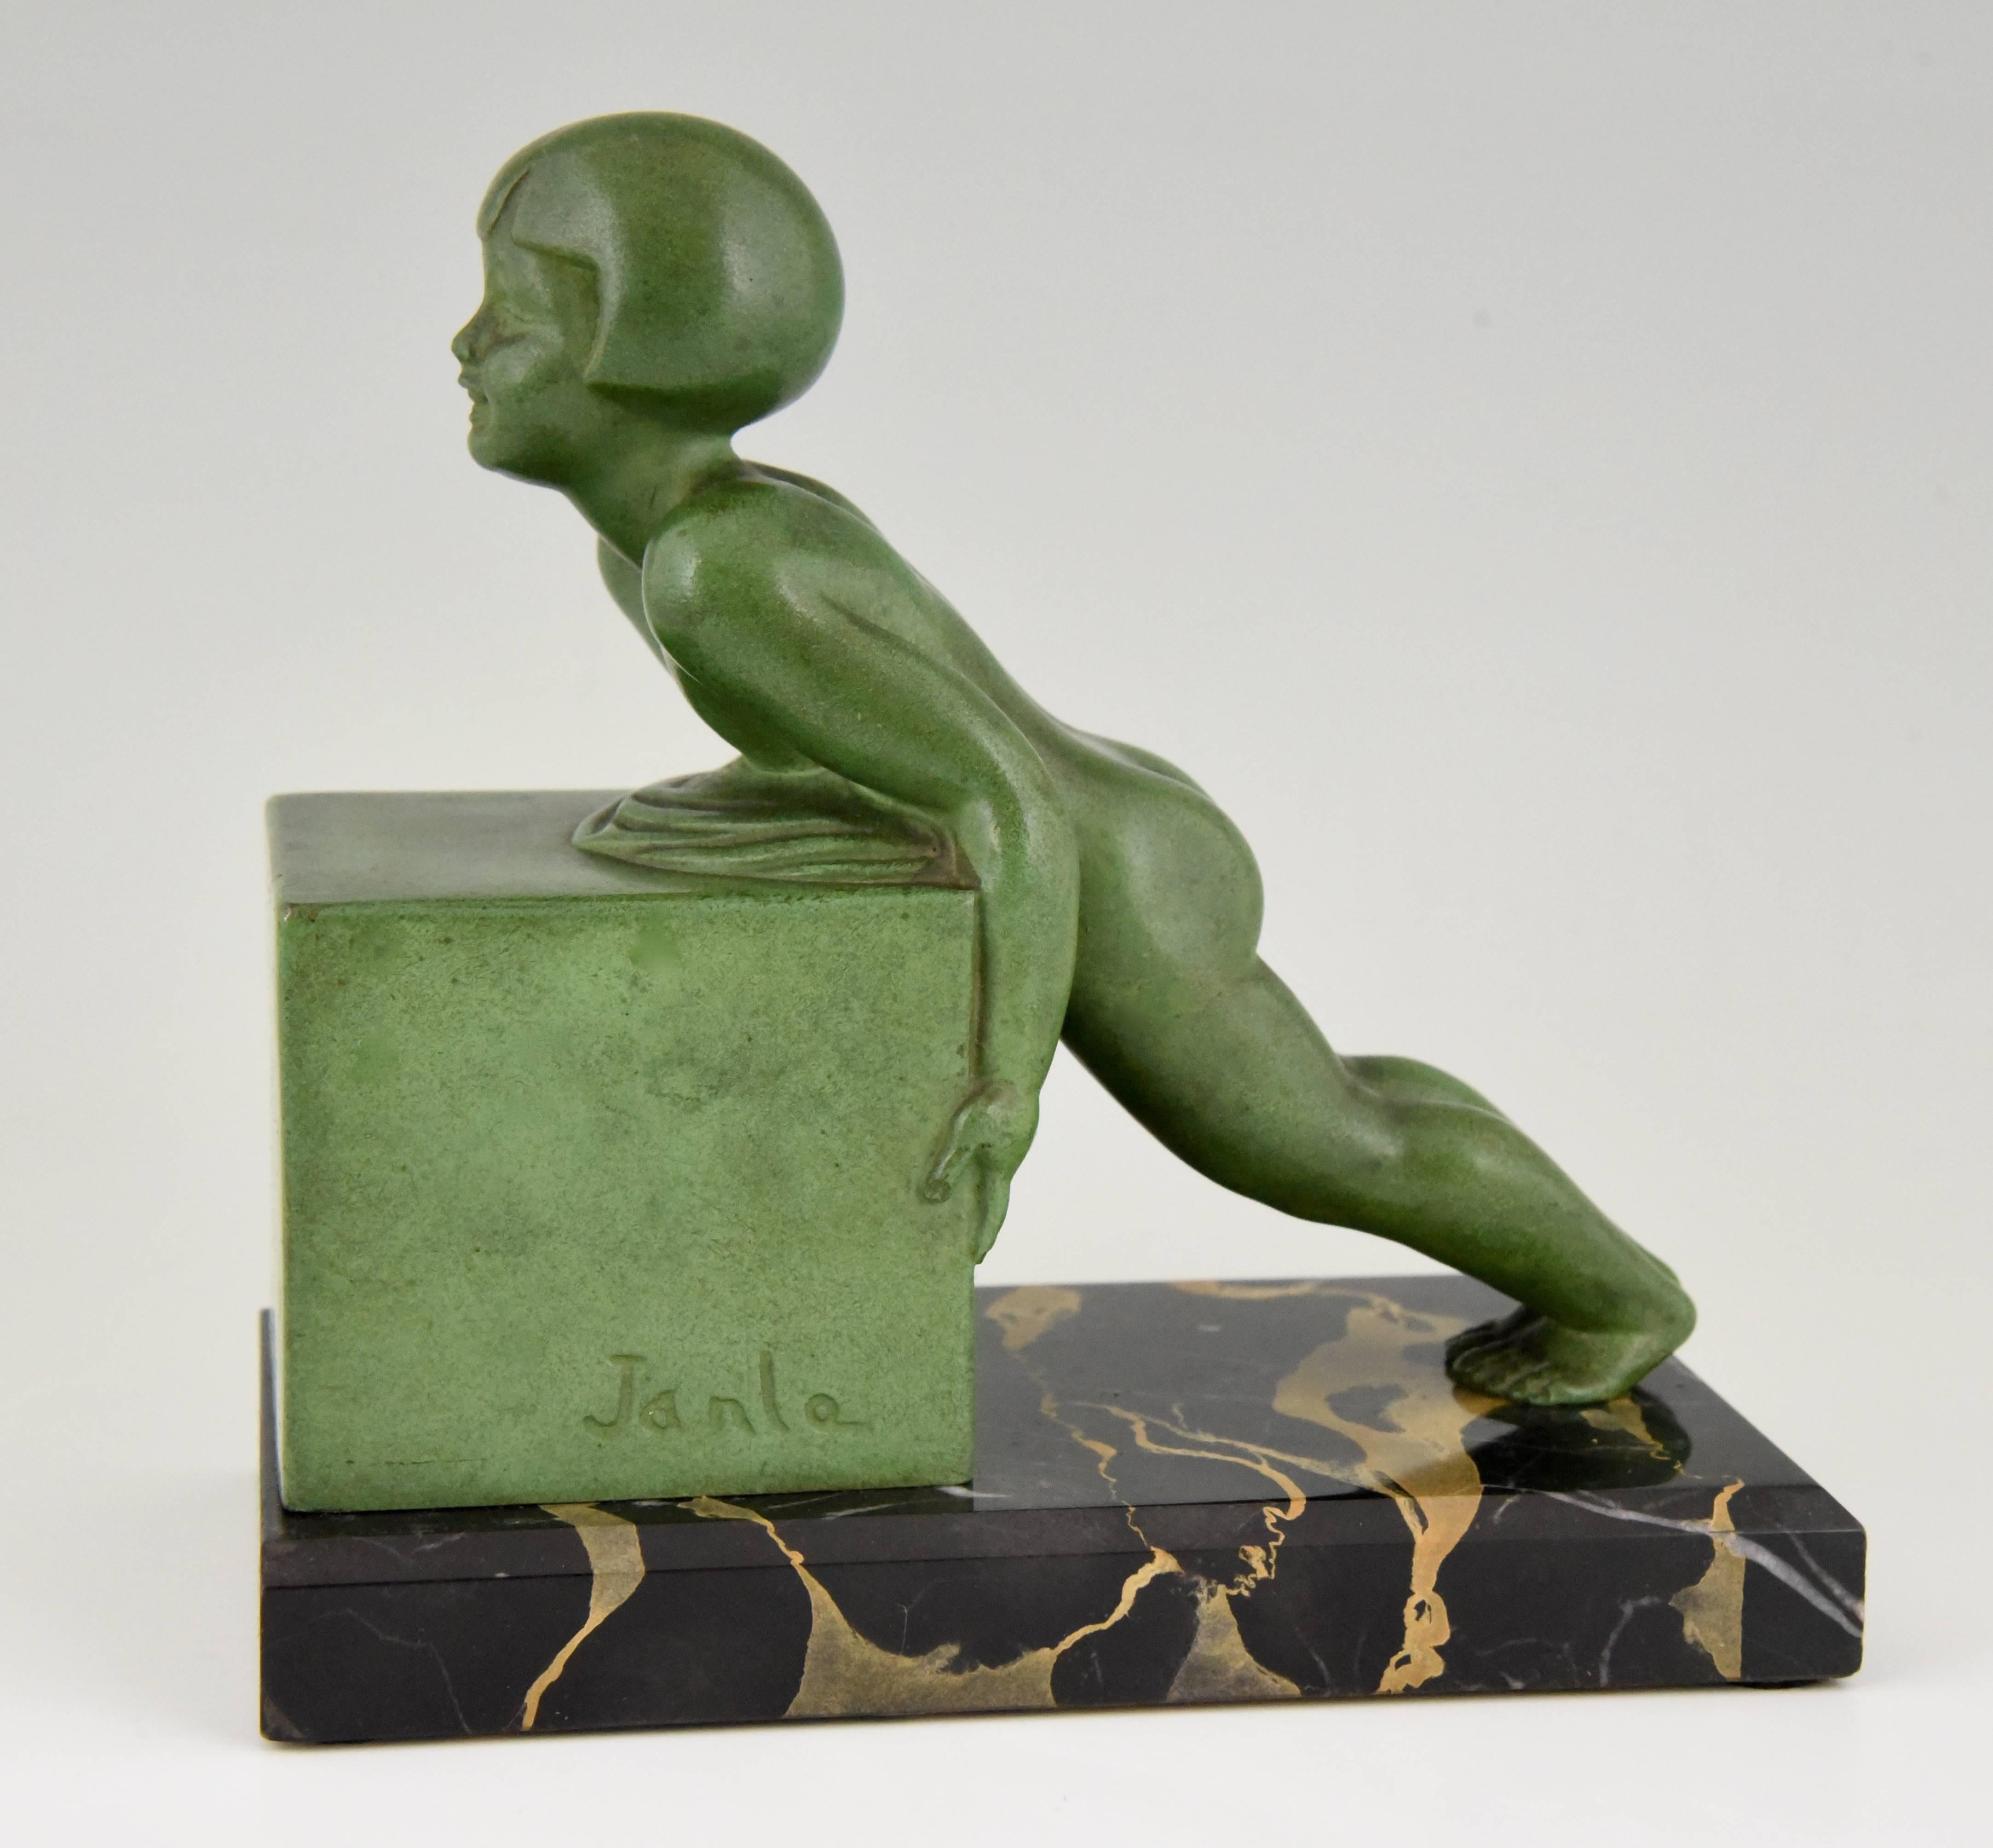 Pair of French Art Deco Child Bookends by Janle, 1930 1